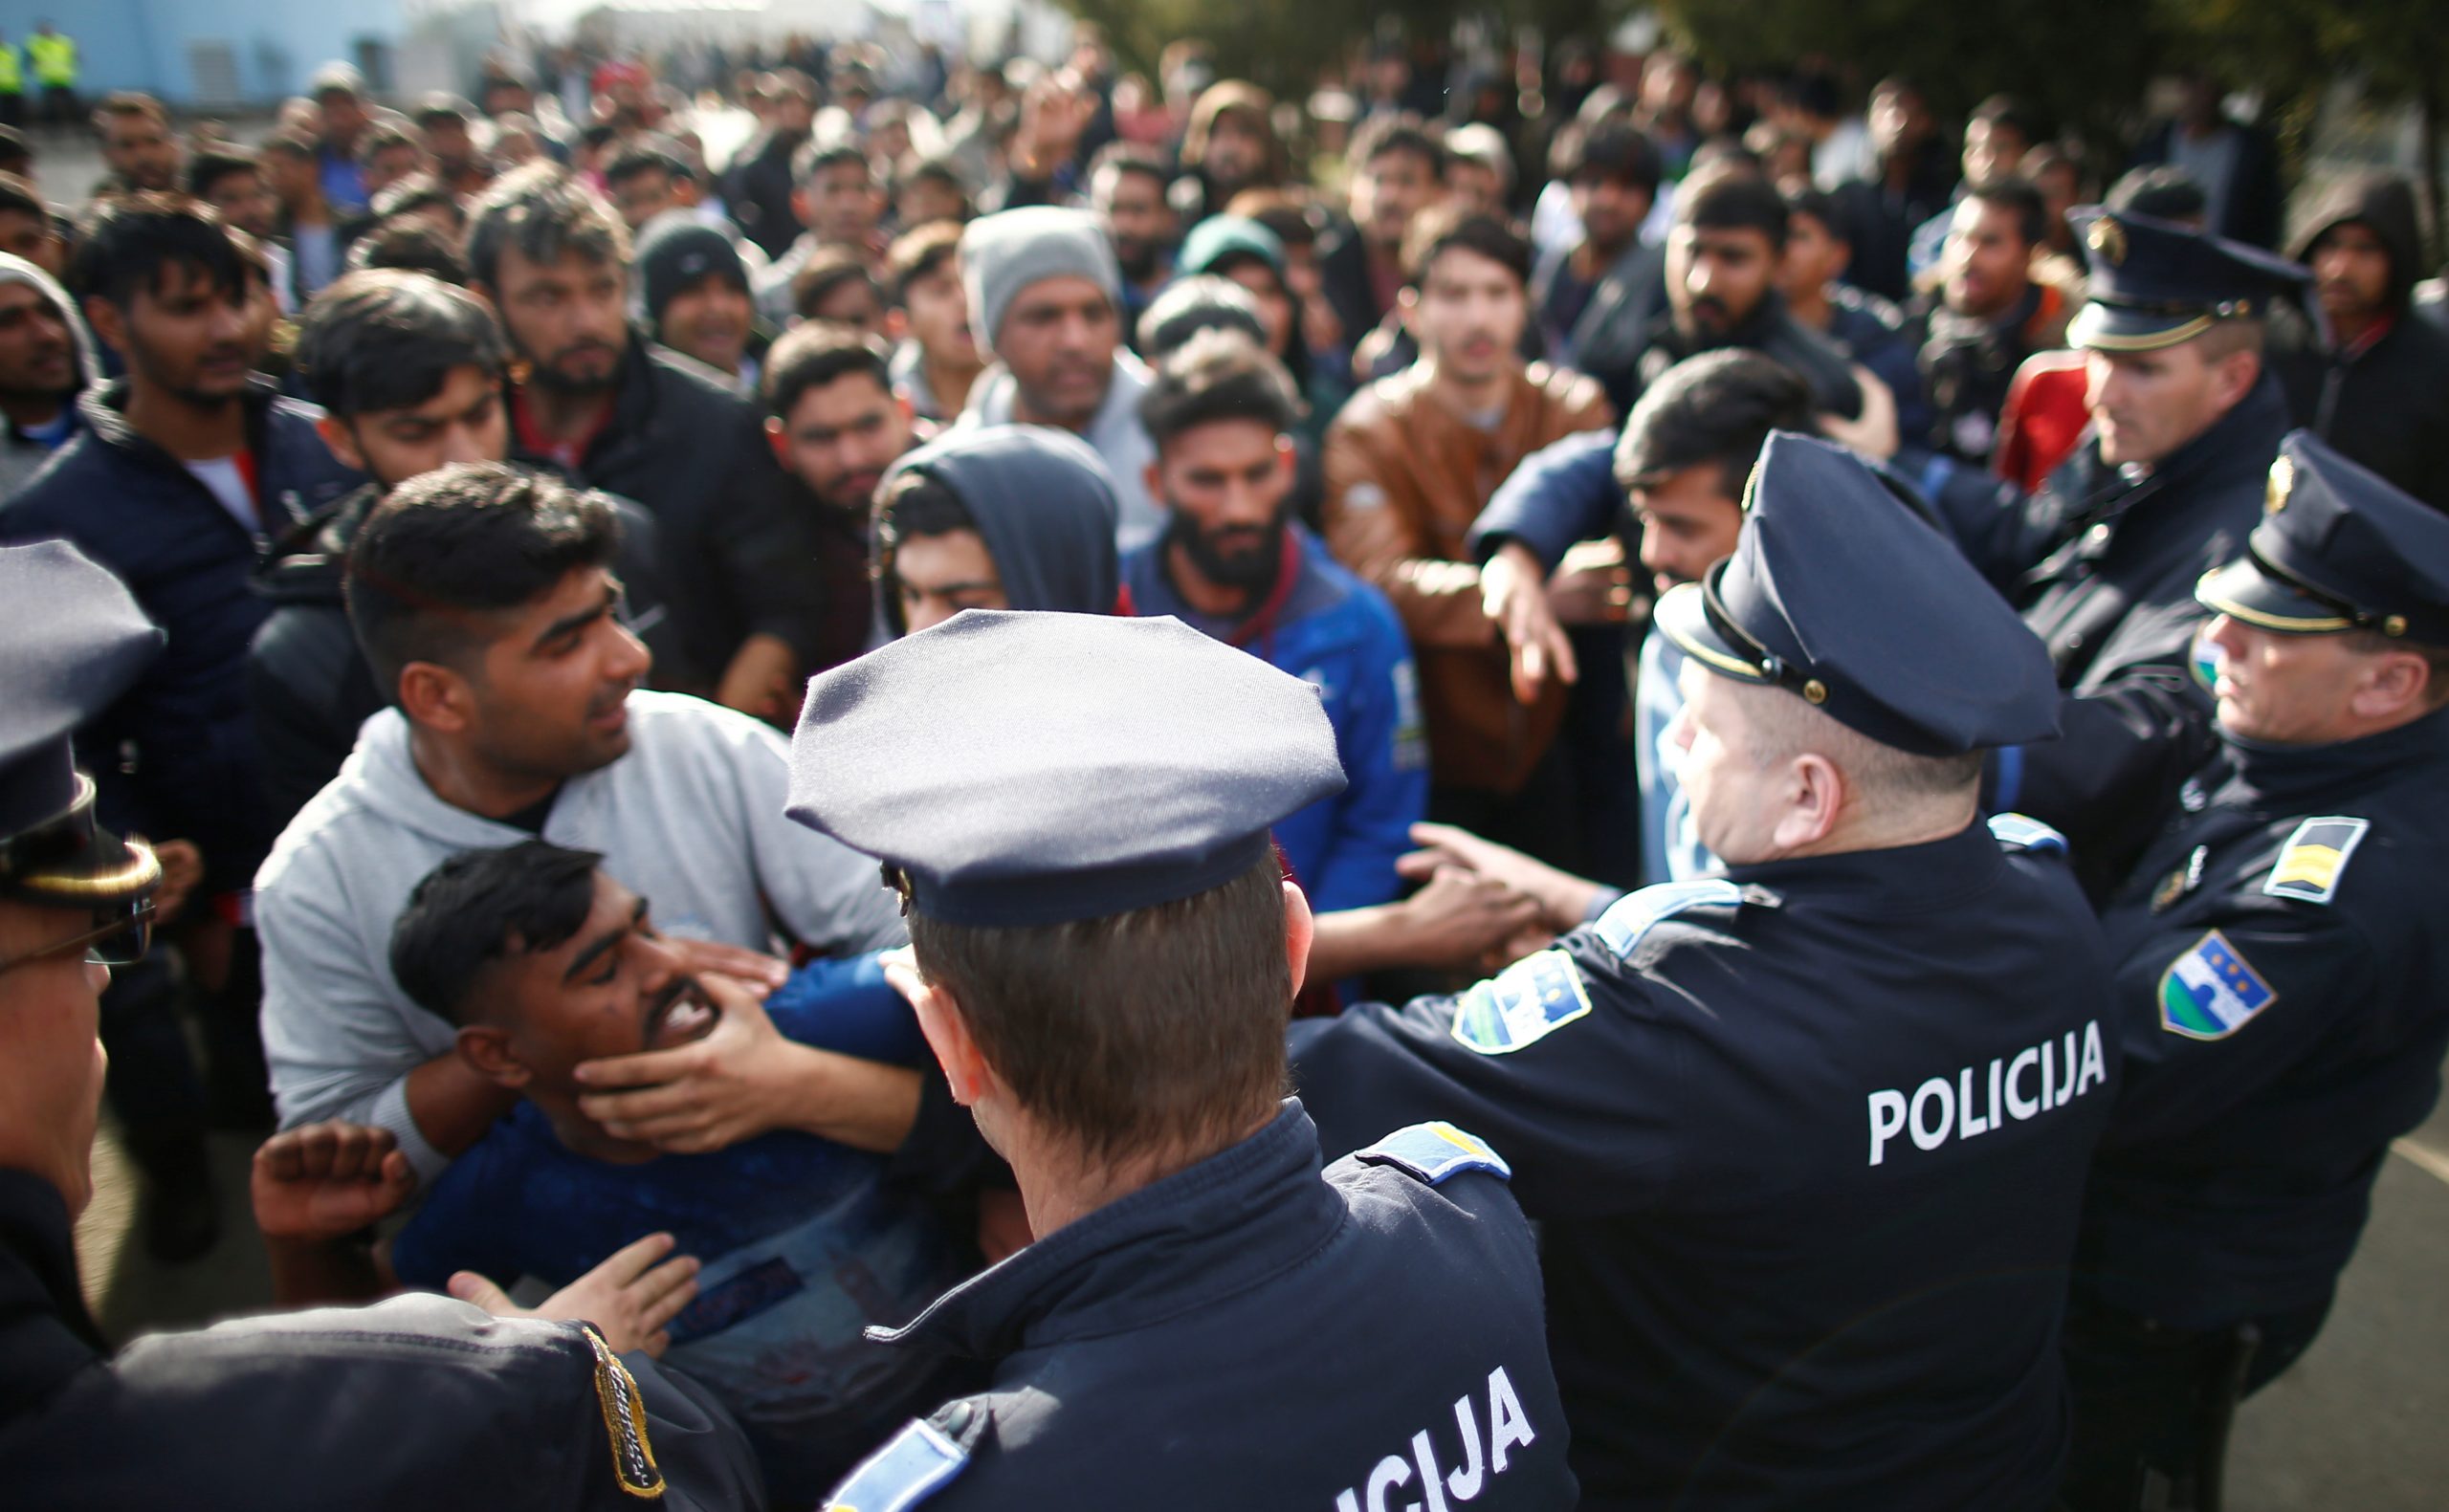 Migrants scuffle with police as they try to block a road in front of the refugee camp Miral in Velika Kladusa Migrants scuffle with police as they try to block a road in front of the refugee camp Miral in Velika Kladusa, Bosnia and Herzegovina February 15, 2020. REUTERS/Dado Ruvic DADO RUVIC